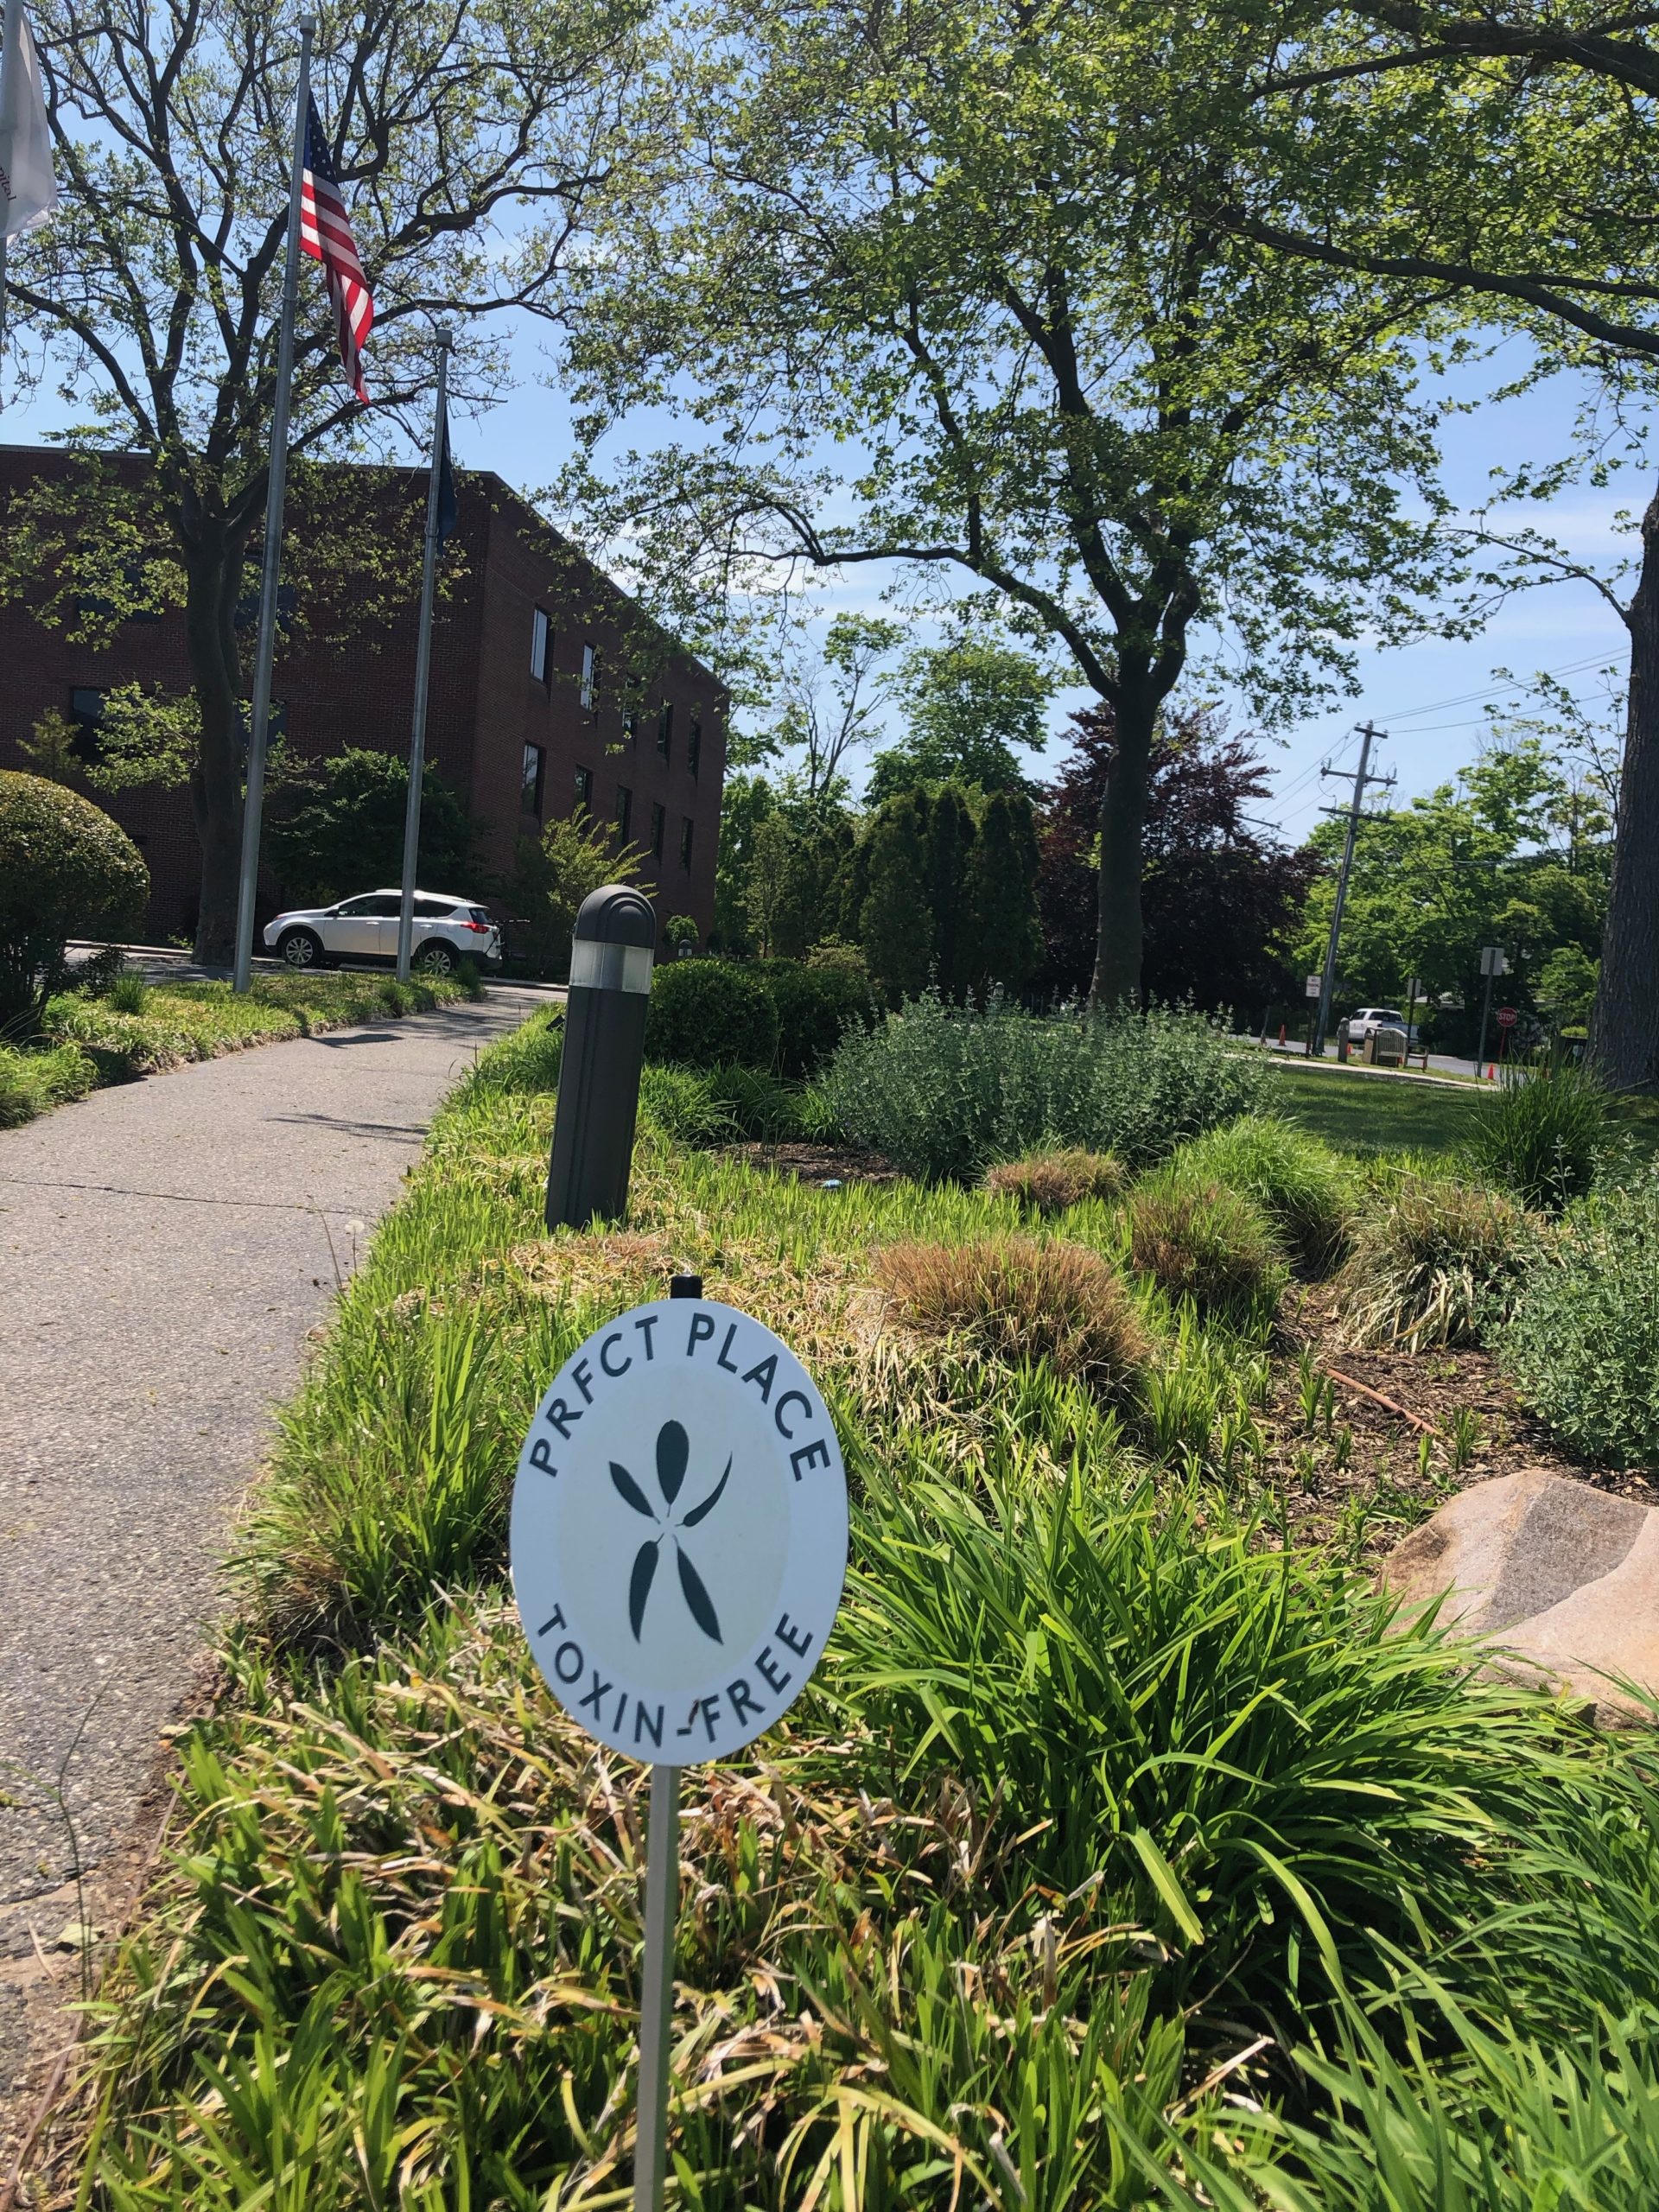 Southampton Hospital has ended use of synthetic lawn chemicals on its 13-acre grounds. David Lopez, of the hospital's Facilities and Engineering division, found it contrary to common sense to use toxic pesticides in the landscape when the hospital's mission is to provide healthcare for the community.